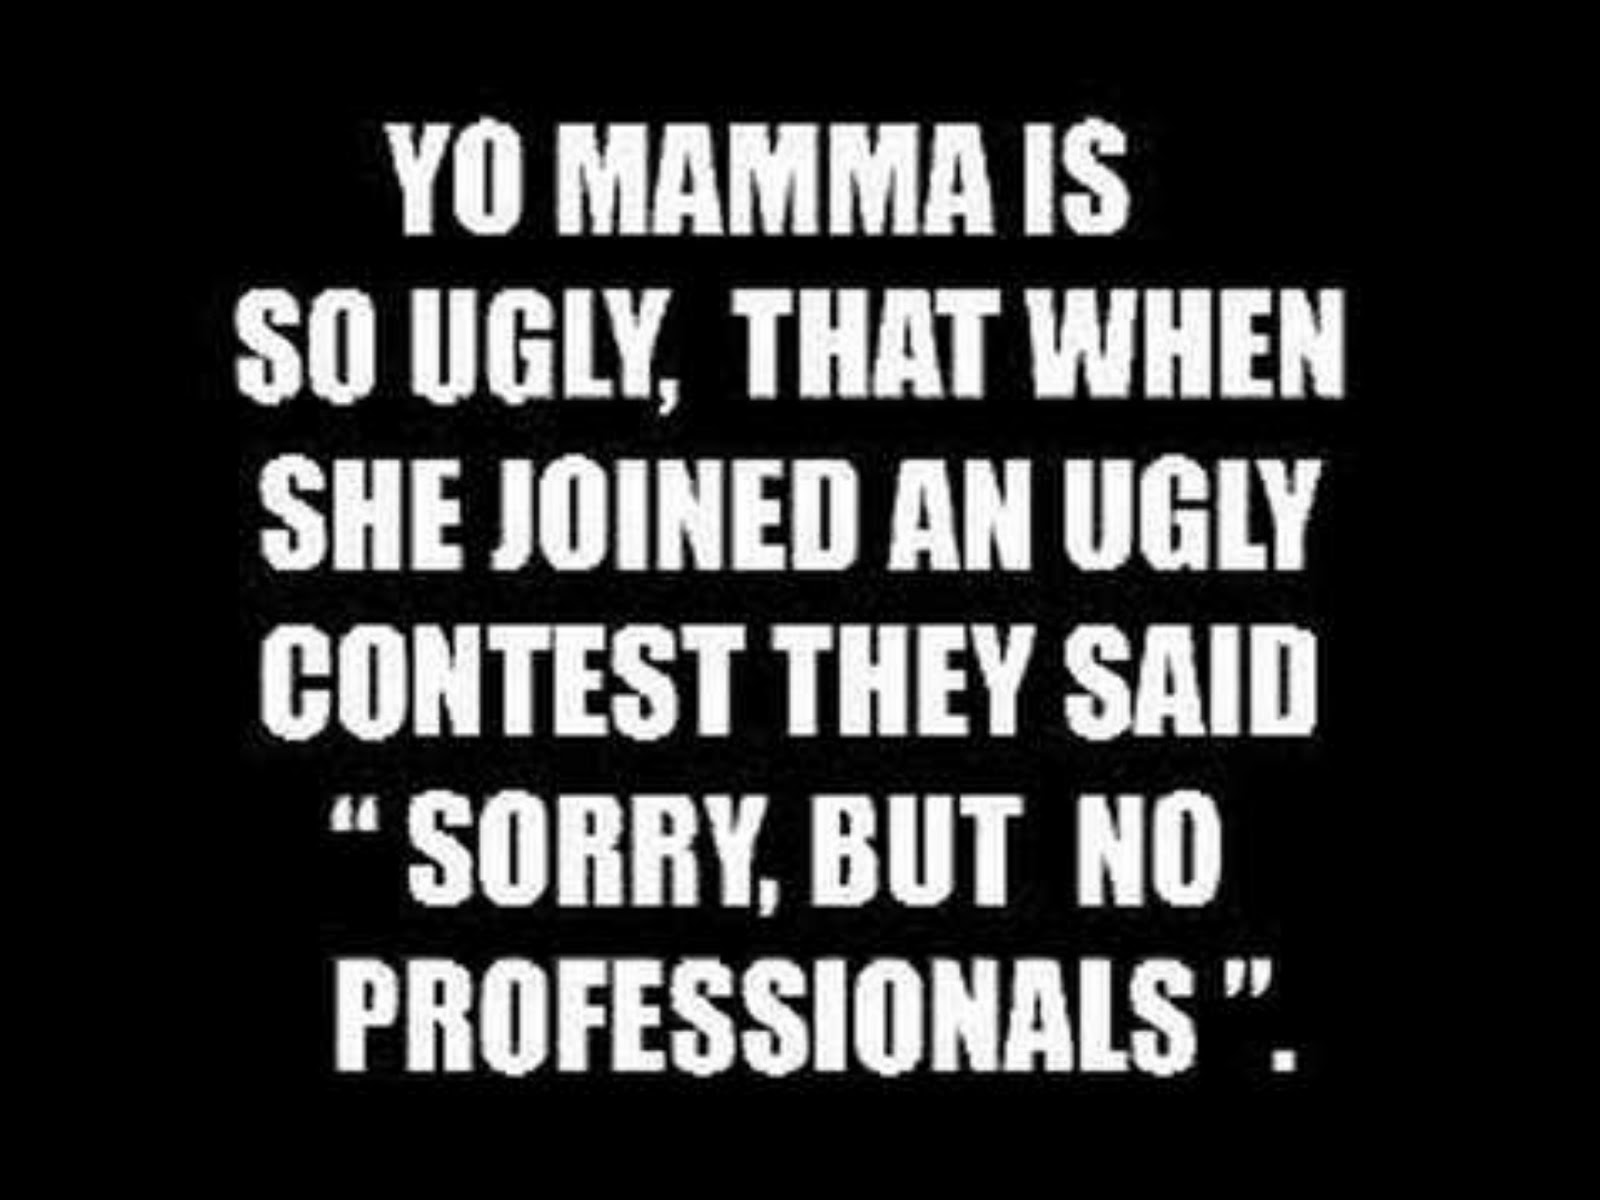 Yo Momma Jokes Quotes Pictures On. QuotesGram